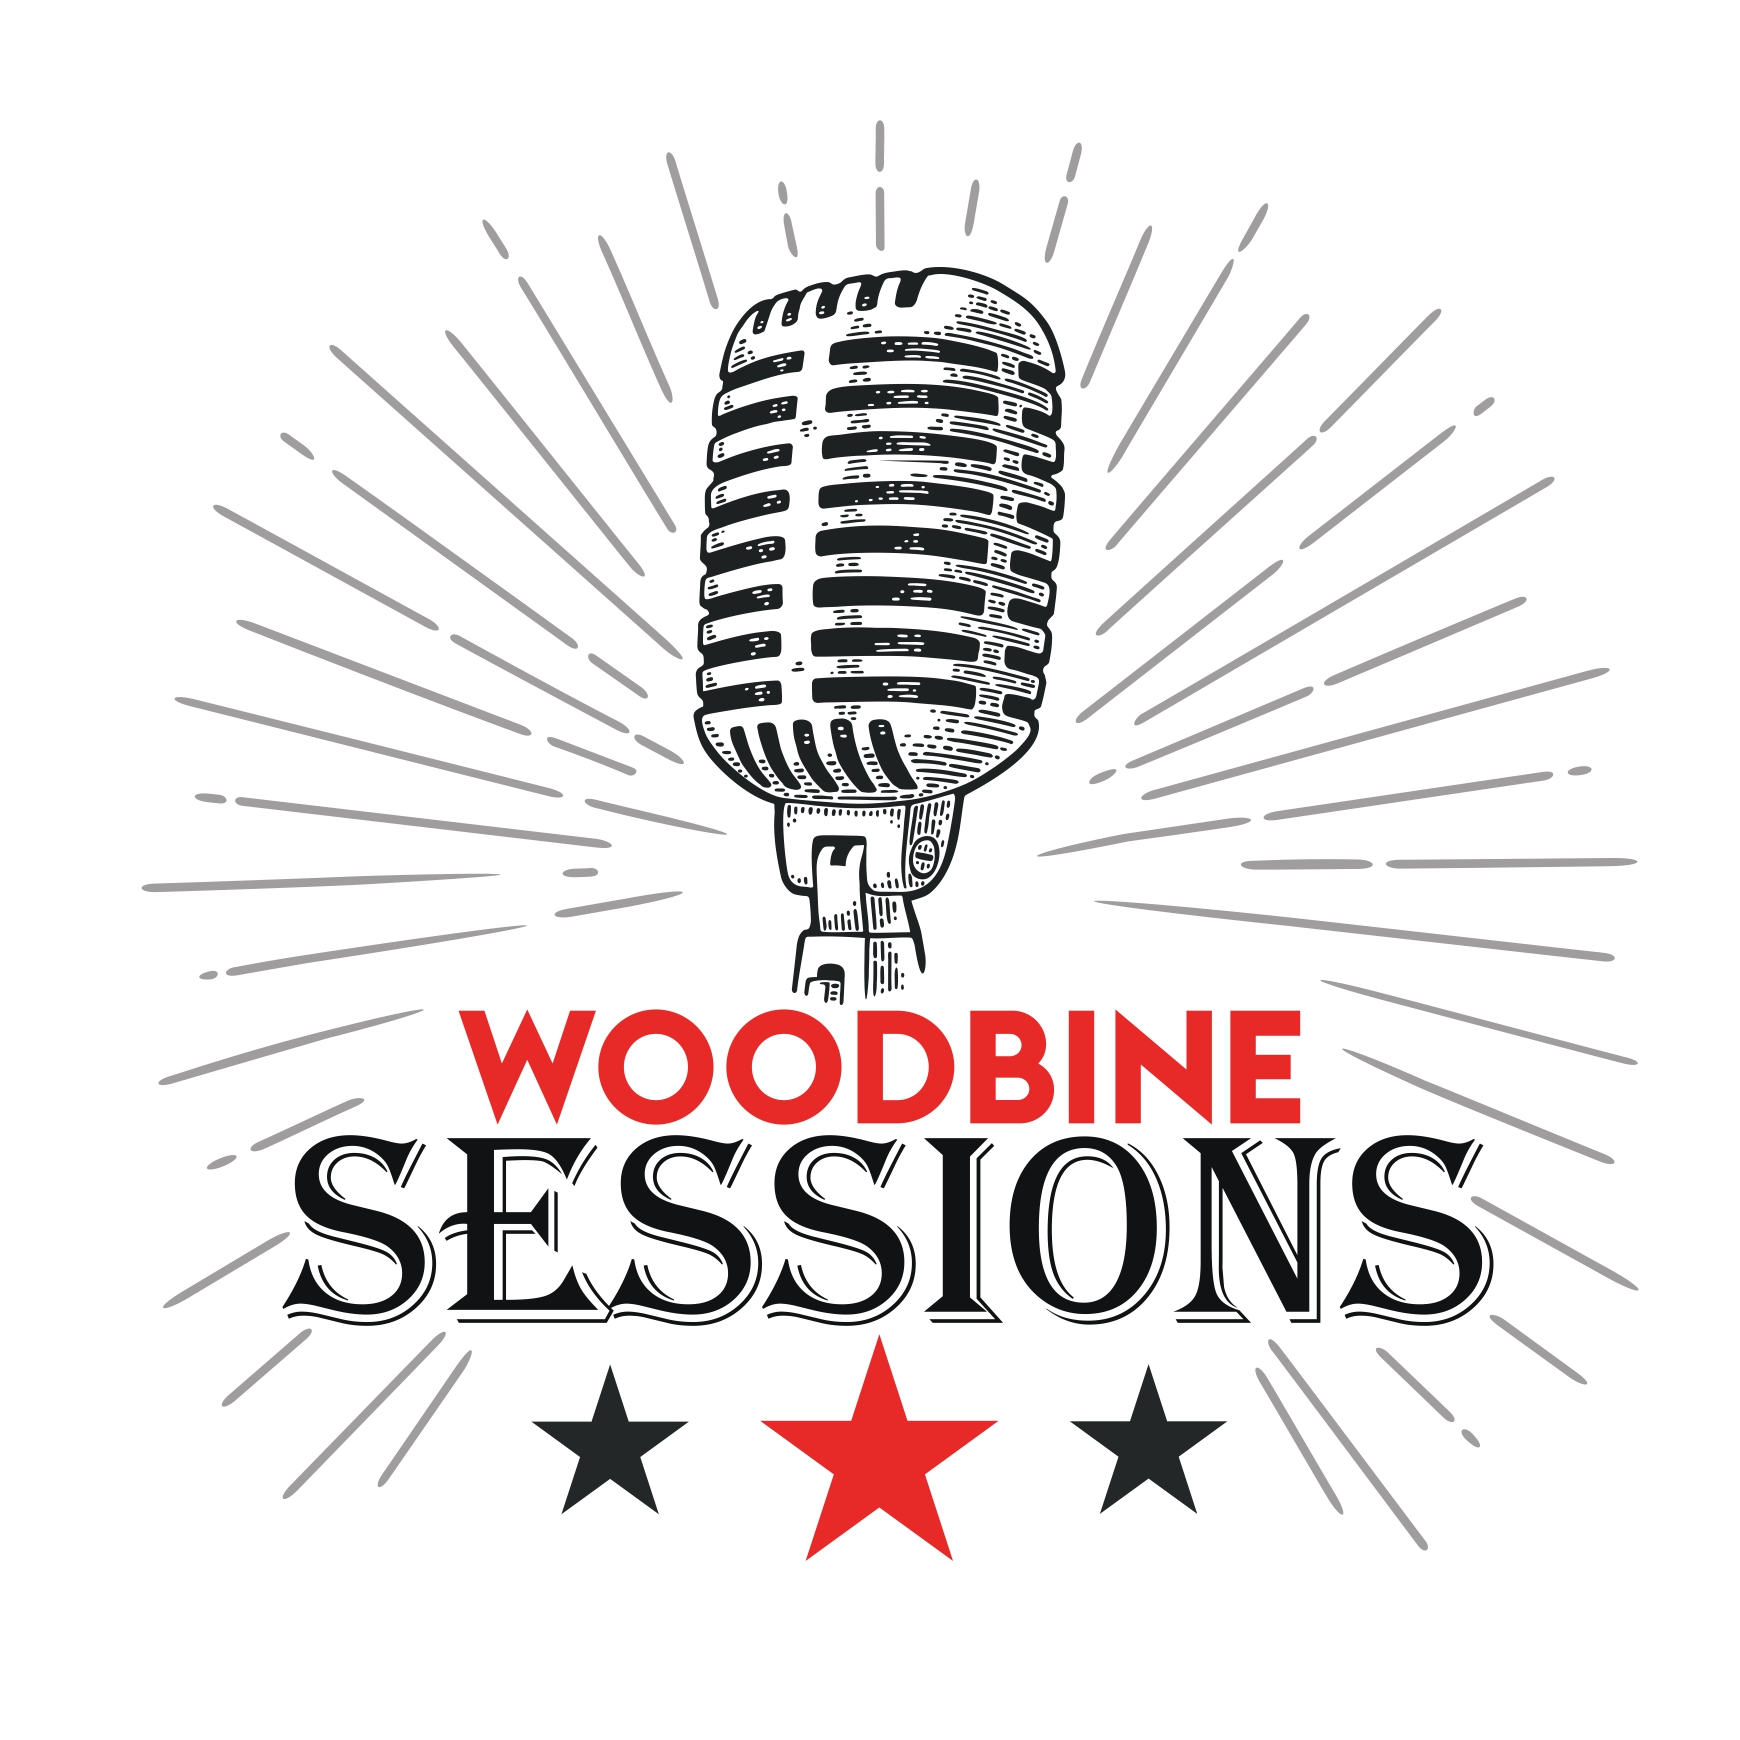 Woodbine Sessions Featuring Ryland James And Jade Eagleson